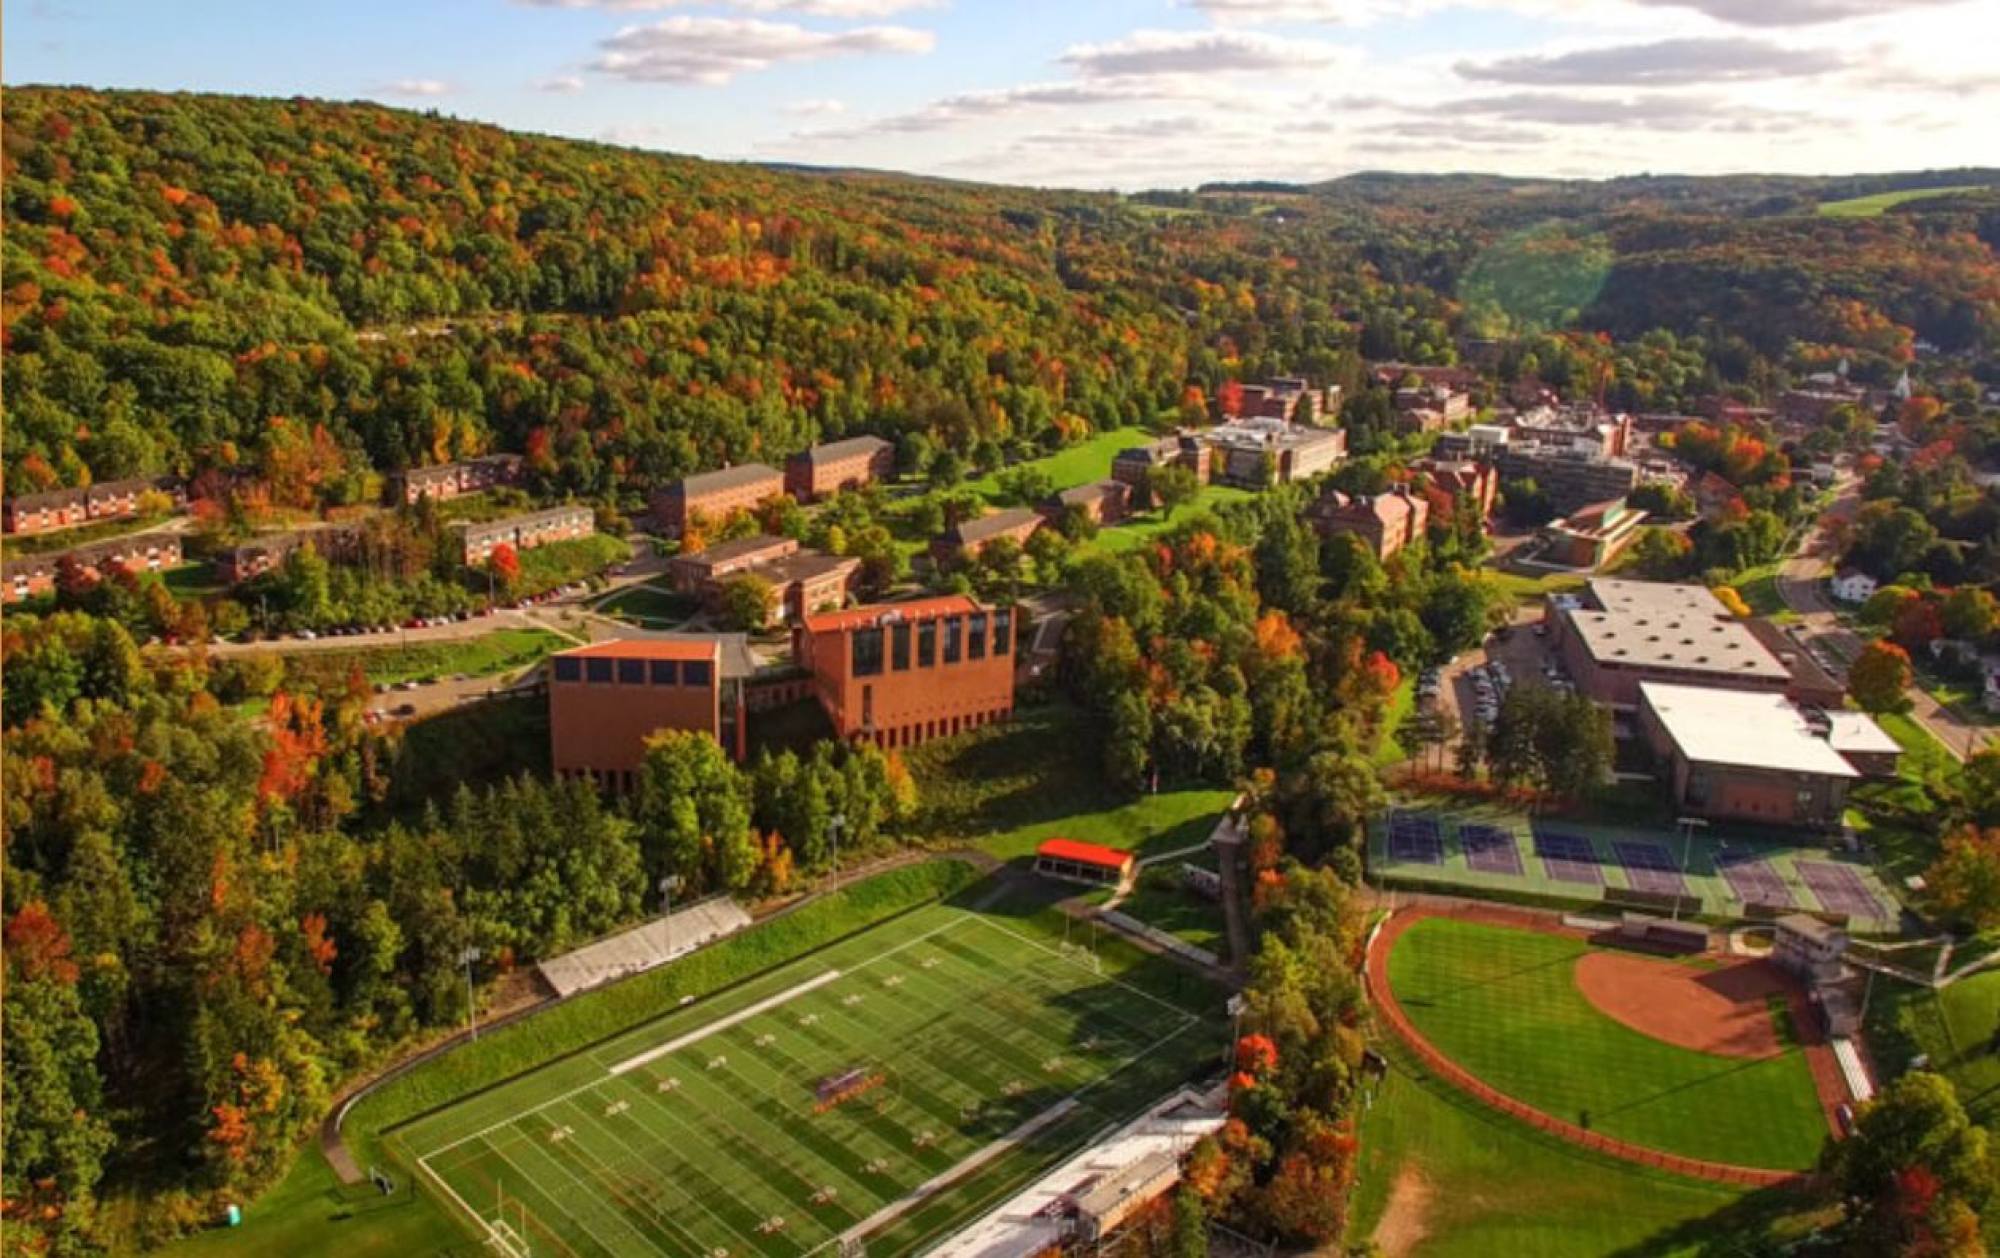 A screenshot from Alfred University’s website shows its campus in upstate New York. Photo: Alfred University